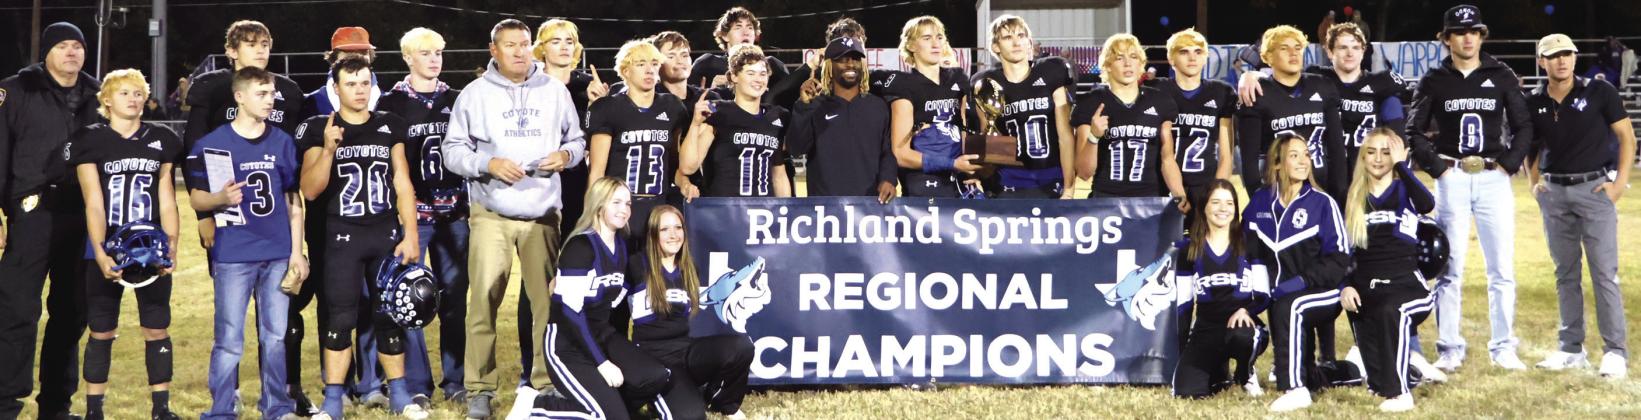 Richland Springs Coyotes after the big win over Cherokee last Friday night ~ Richland Springs 78 - Cherokee 54 photo courtesy of James Womack